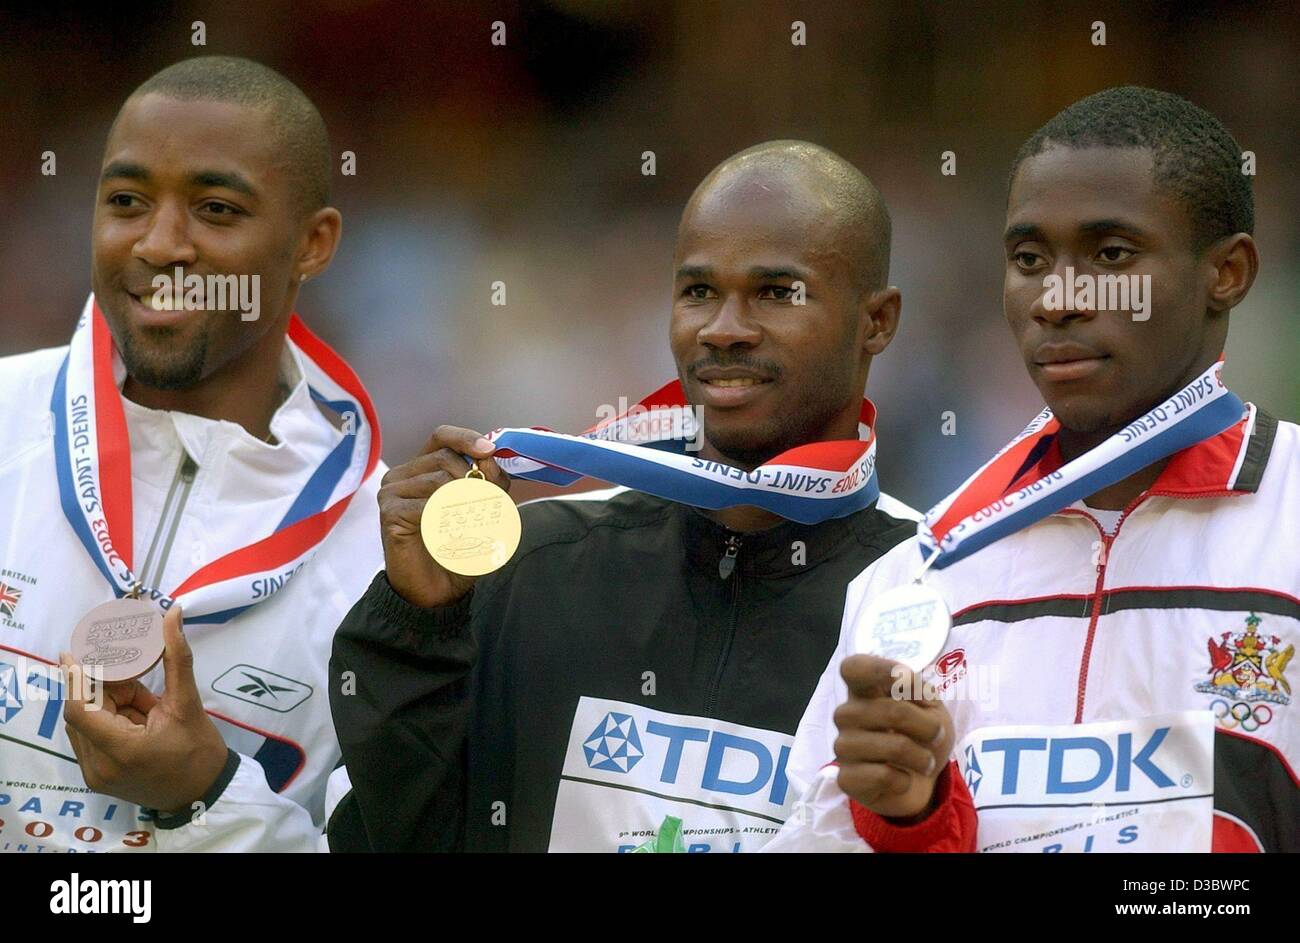 (dpa) - The winners of the men's 100 m sprint, silver-medal winner Darrel Brown from Trinidad and Tobago (R), gold-medal winner Kim Collins from Saint Kitts and Nevis (C) and third-placed Darren Campbell from Britain, pose with their medals on the podium at the 9th IAAF Athletic World Championships  Stock Photo